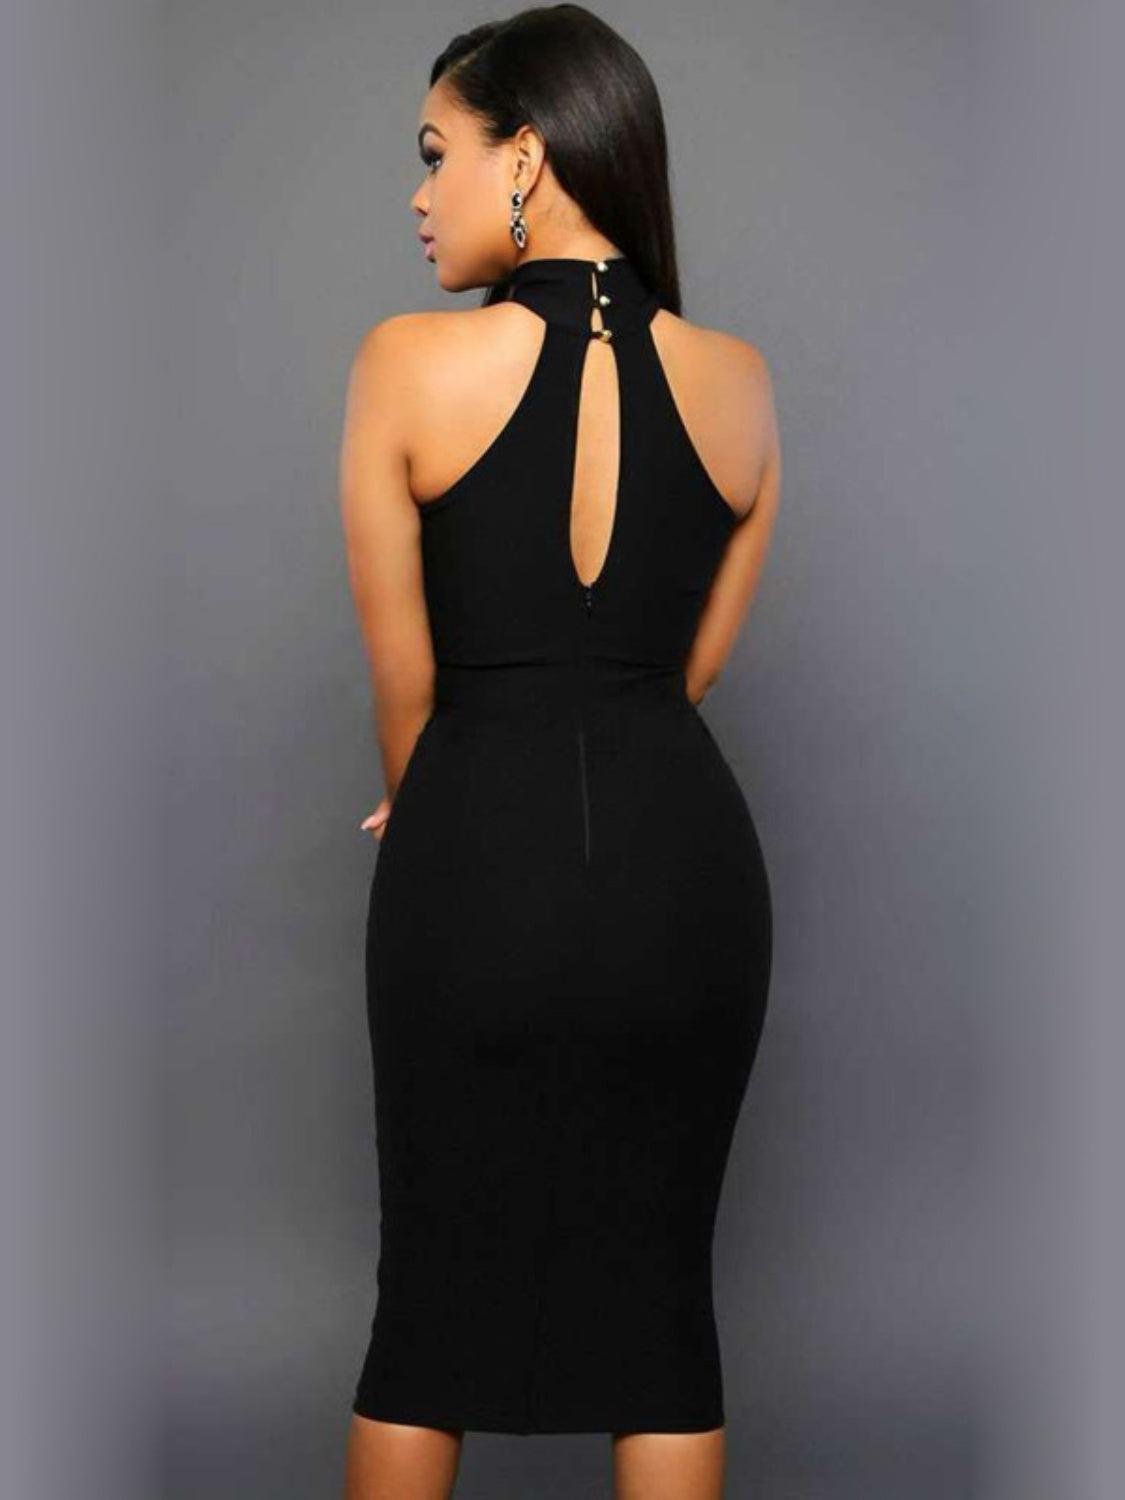 the back of a woman wearing a black dress